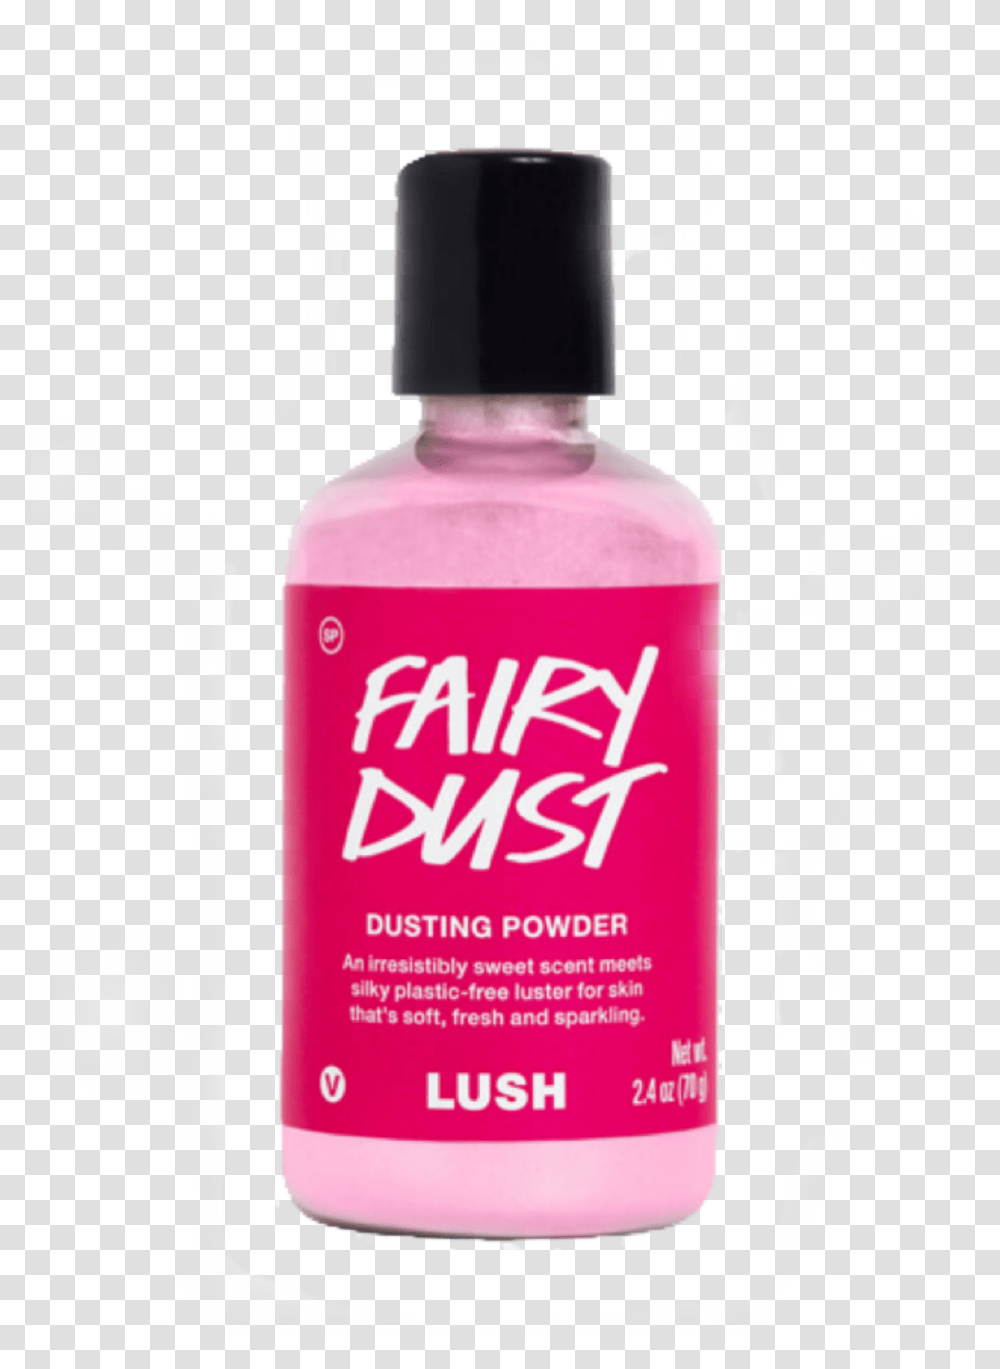 Sorry Bad Cutting Lush Niche Nichememes Pngs Skinca Bottle, Label, Text, Cosmetics, Aftershave Transparent Png